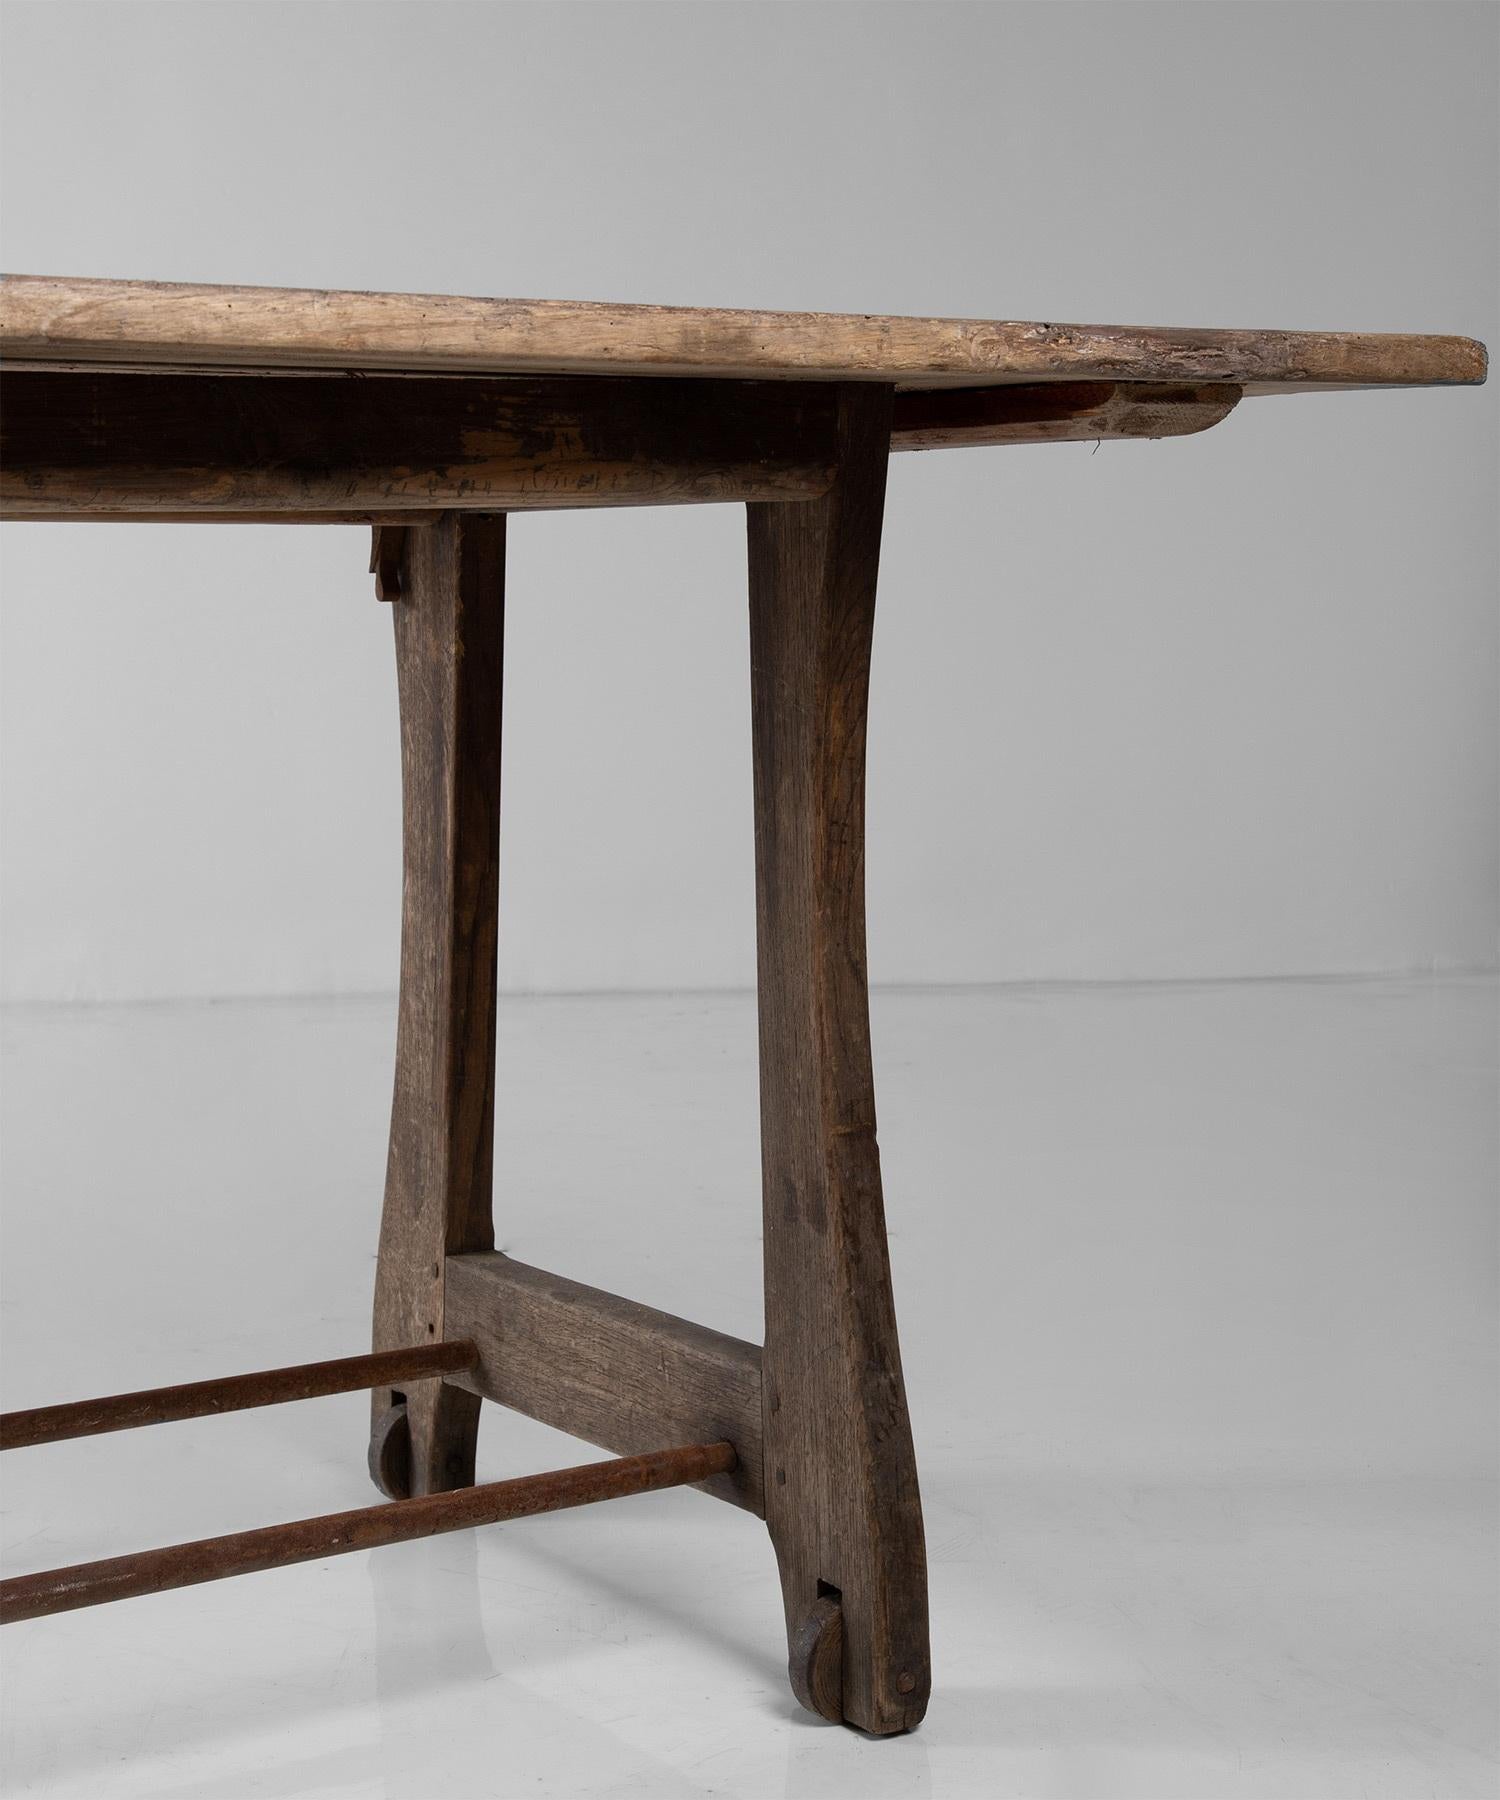 Primitive Work Table with Wooden Wheels, France circa 1900